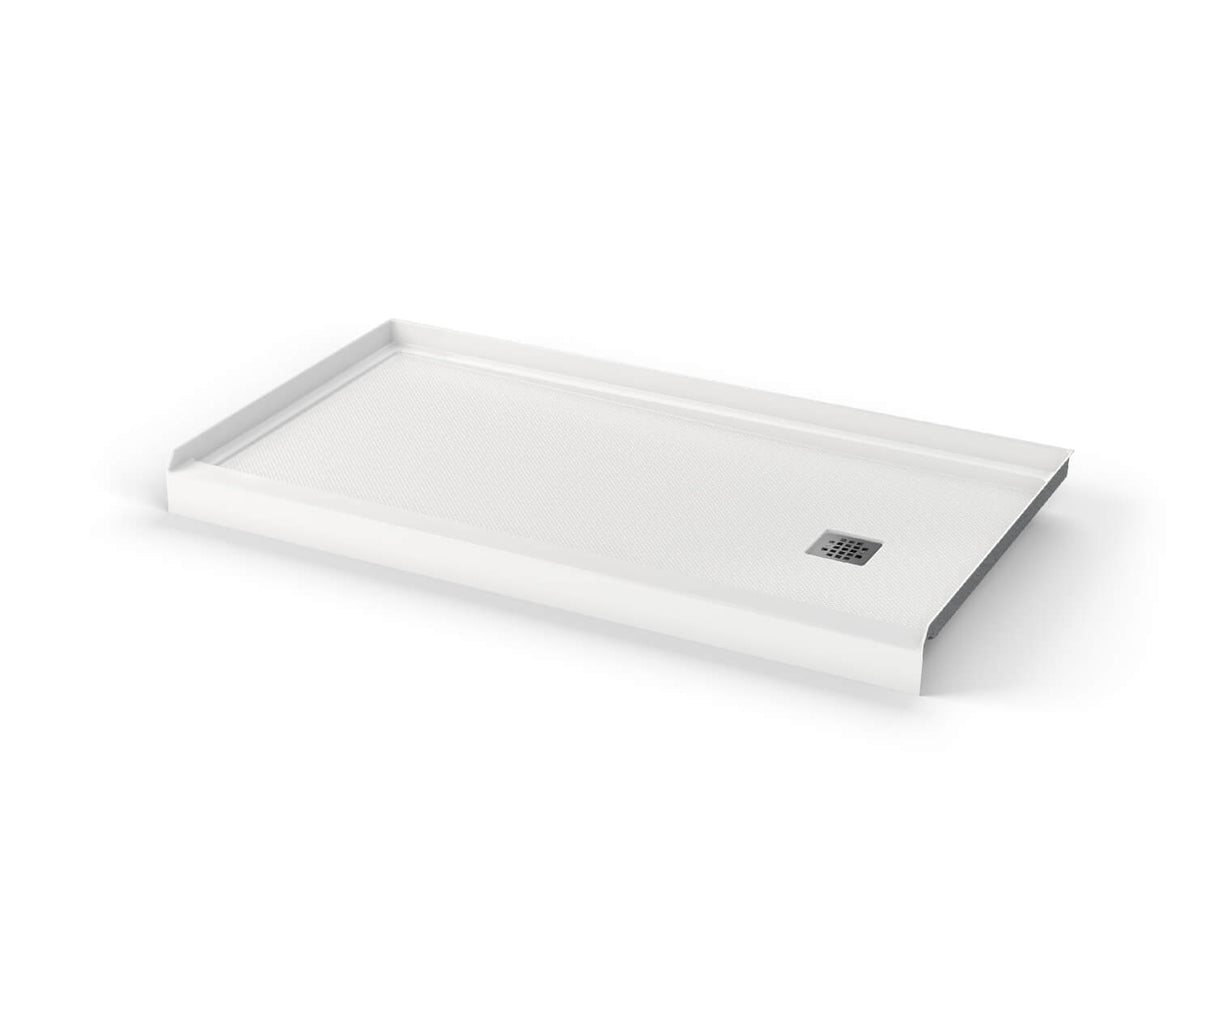 MAAX 420004-541-001-105 B3Square 6030 Acrylic Alcove Shower Base in White with Anti-slip Bottom with Right-Hand Drain